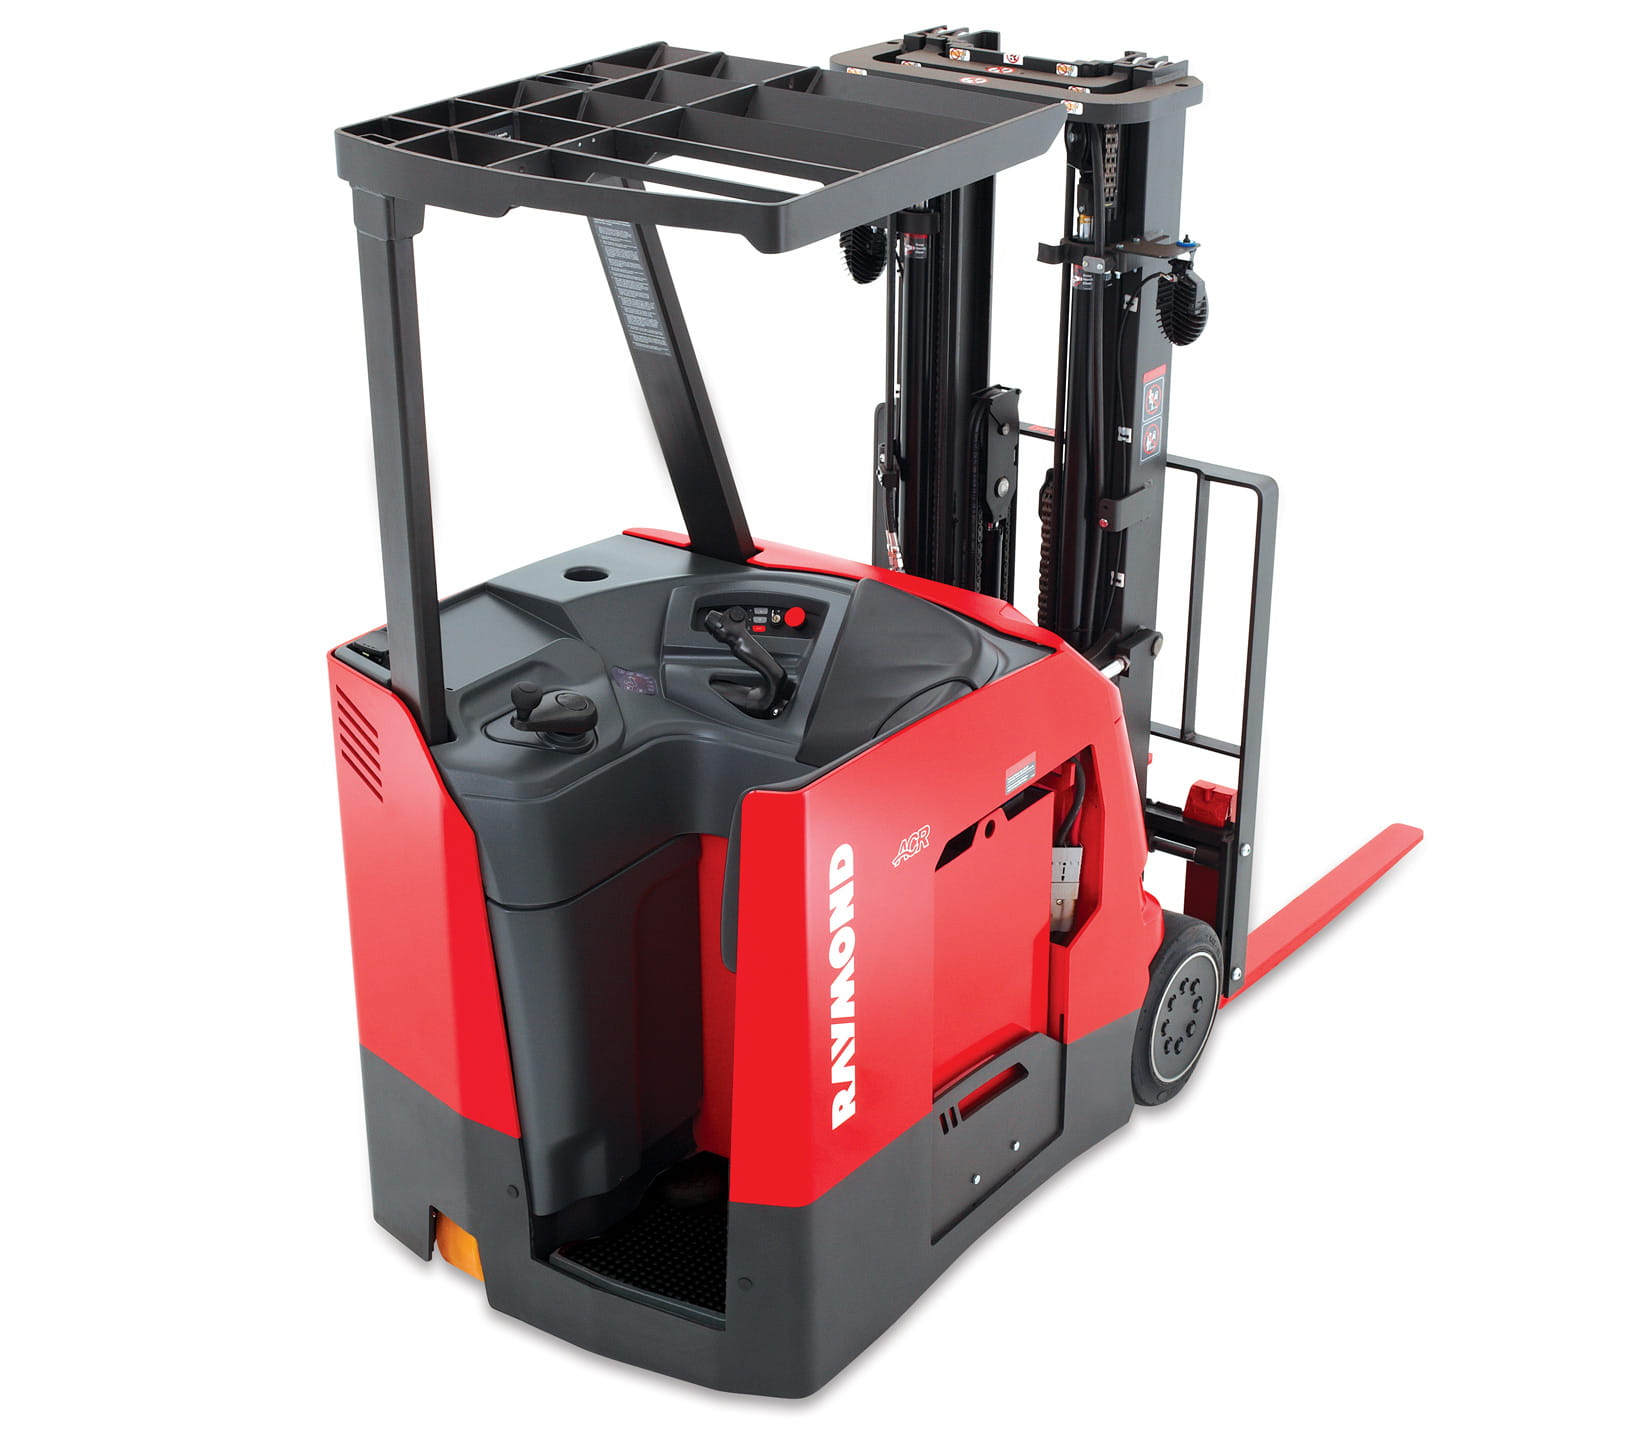 counterbalanced forklift